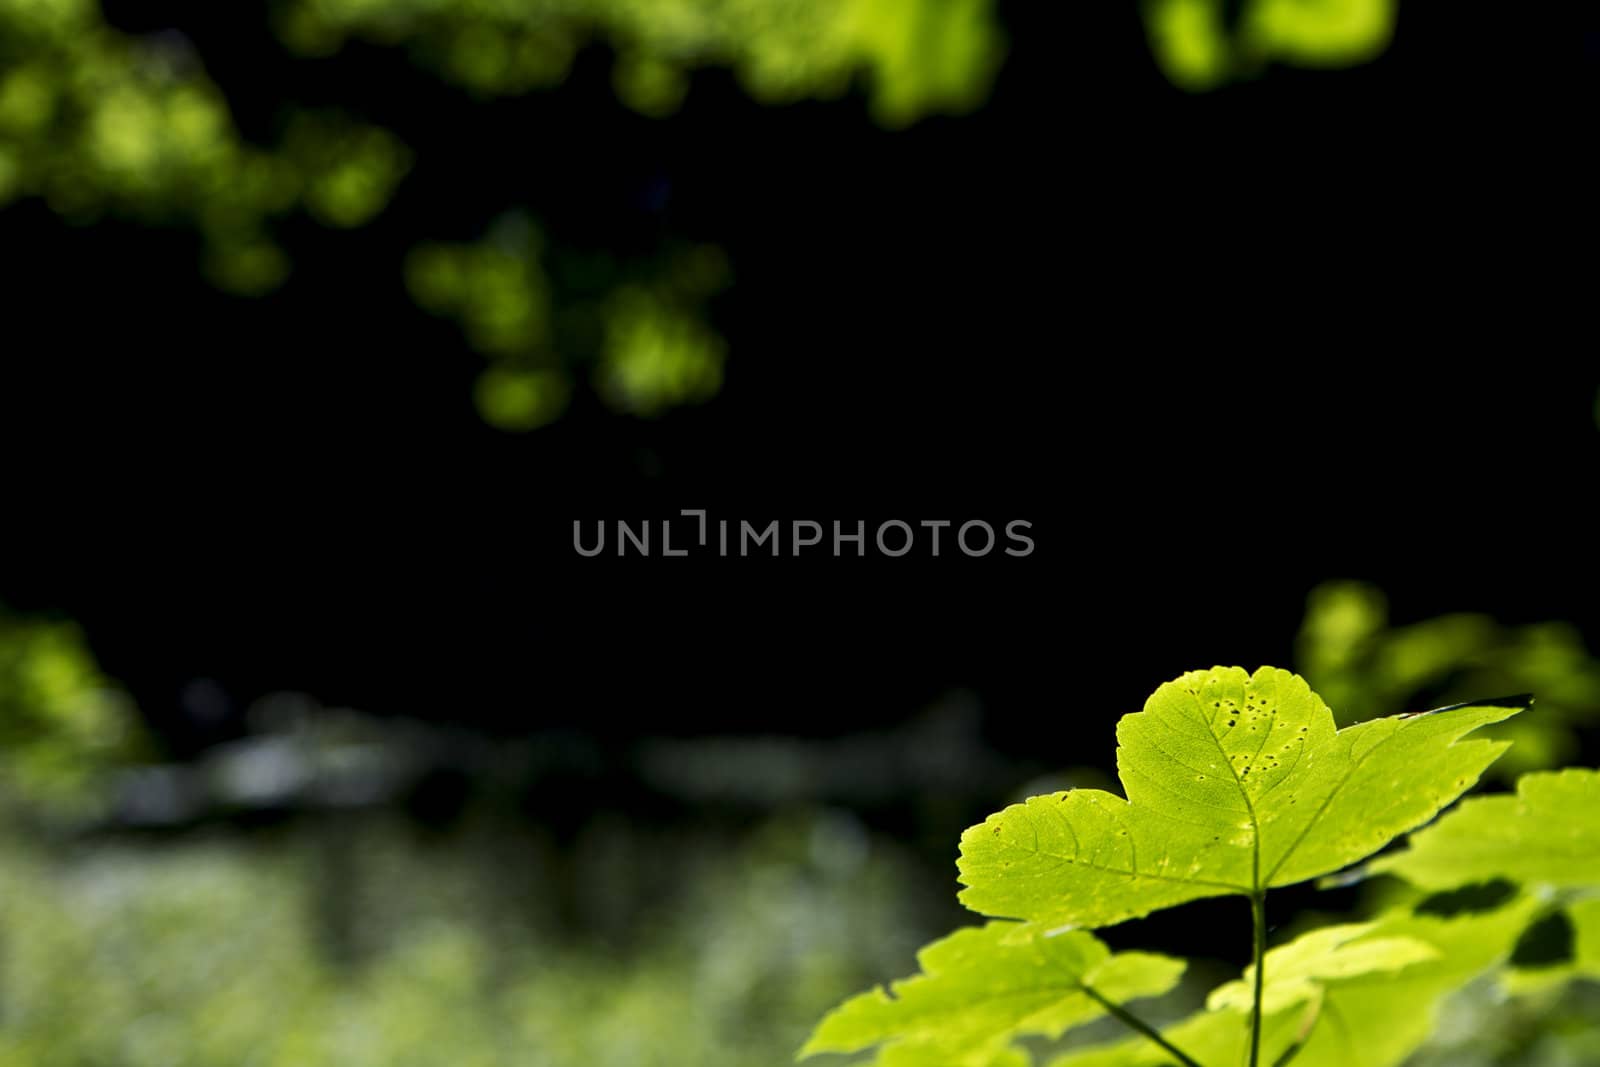 green leaves in foreground with blurry, dark background